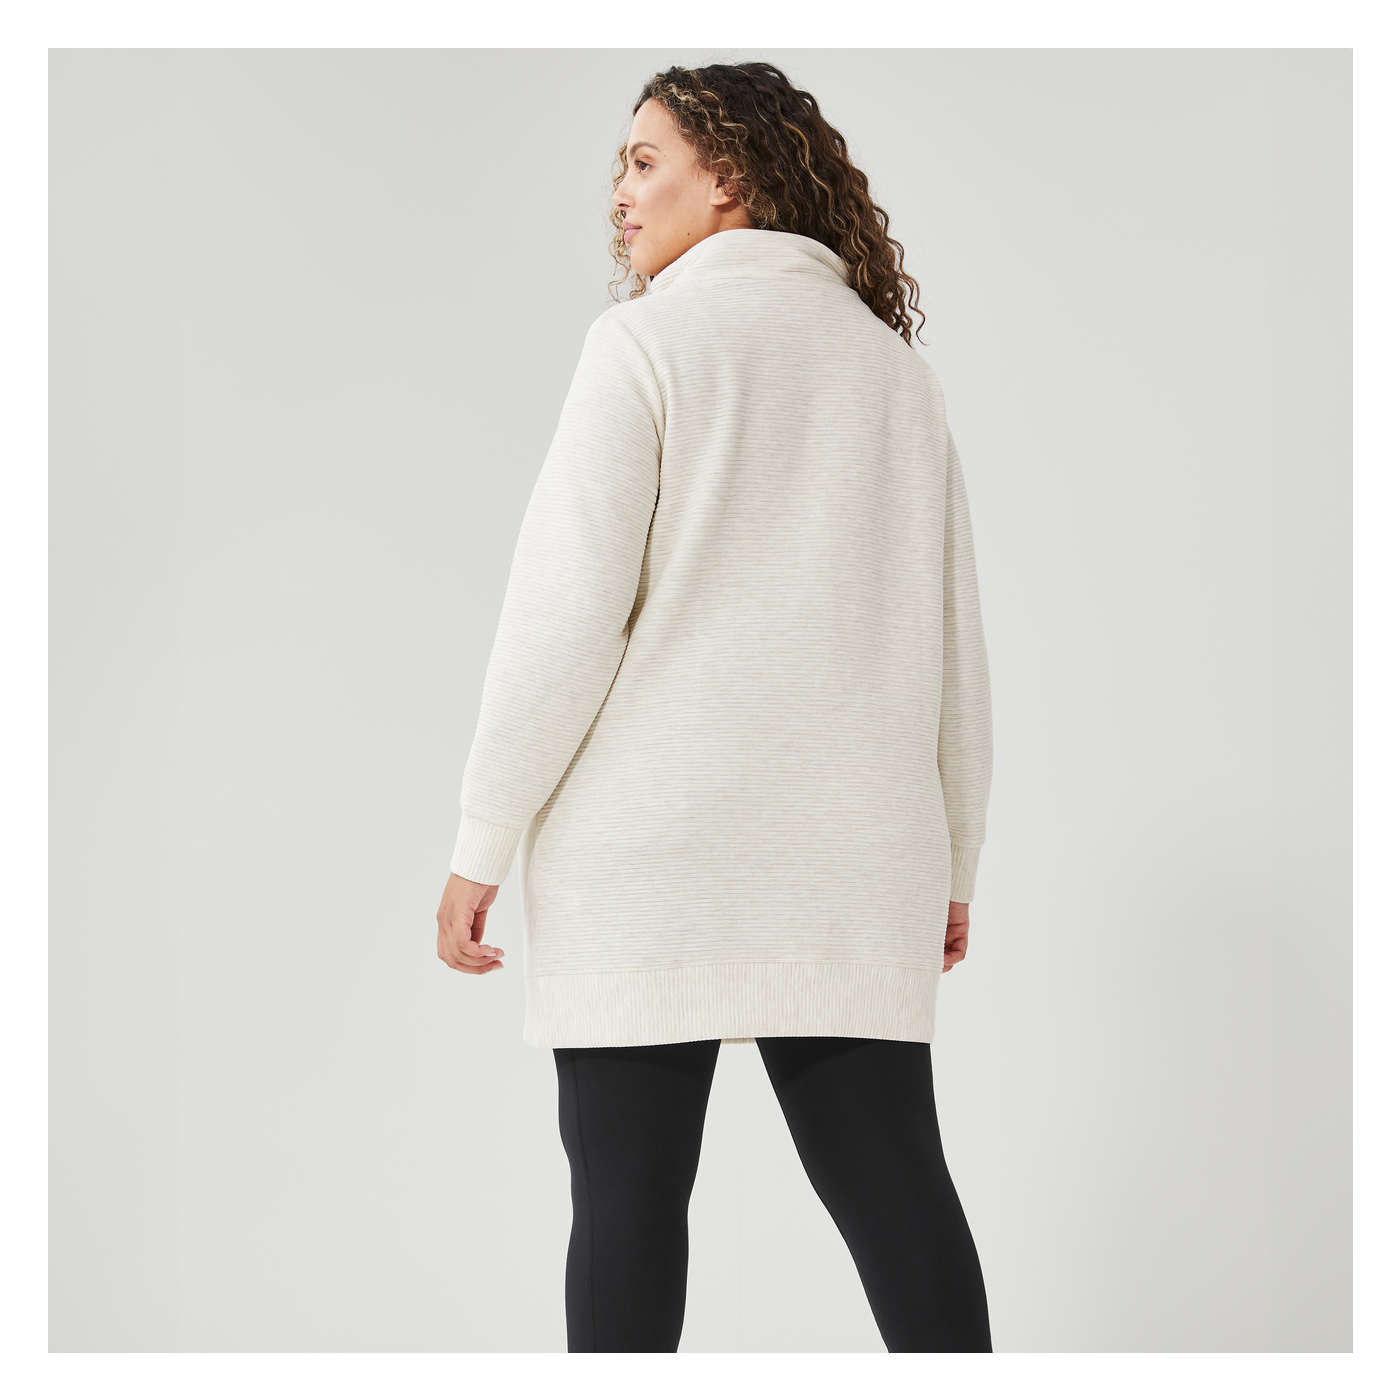 Overlap Active Tunic in Oat Mix from Joe Fresh